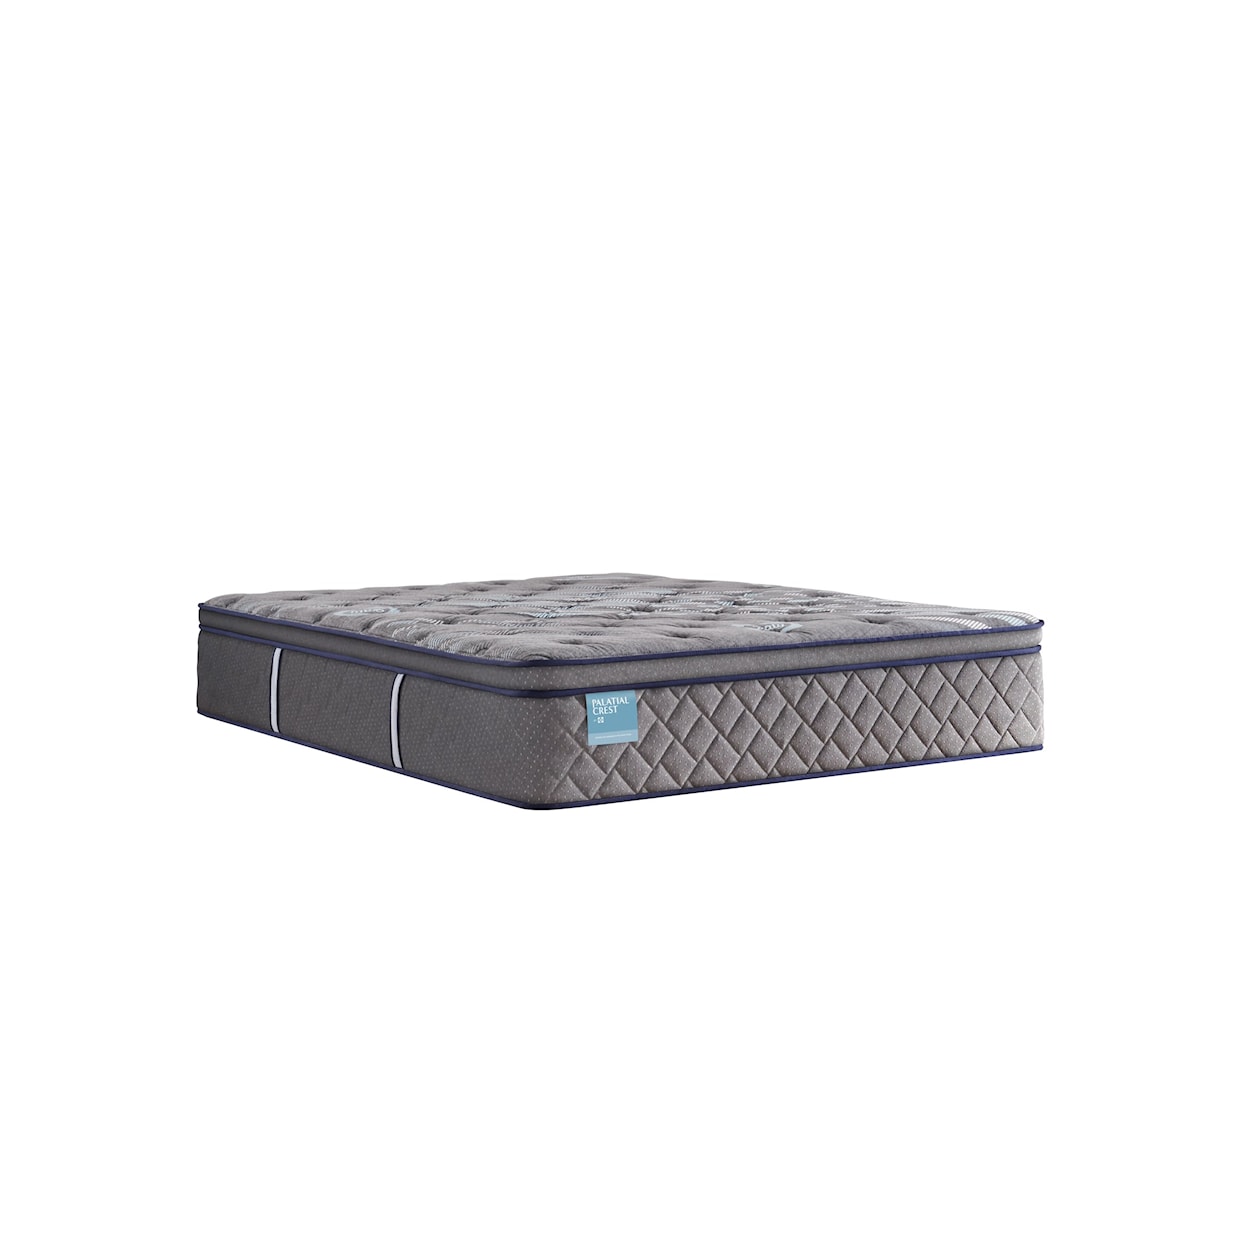 Sealy Palatial Crest S6 Cathedral Cove Soft EPT Split CA King Mattress